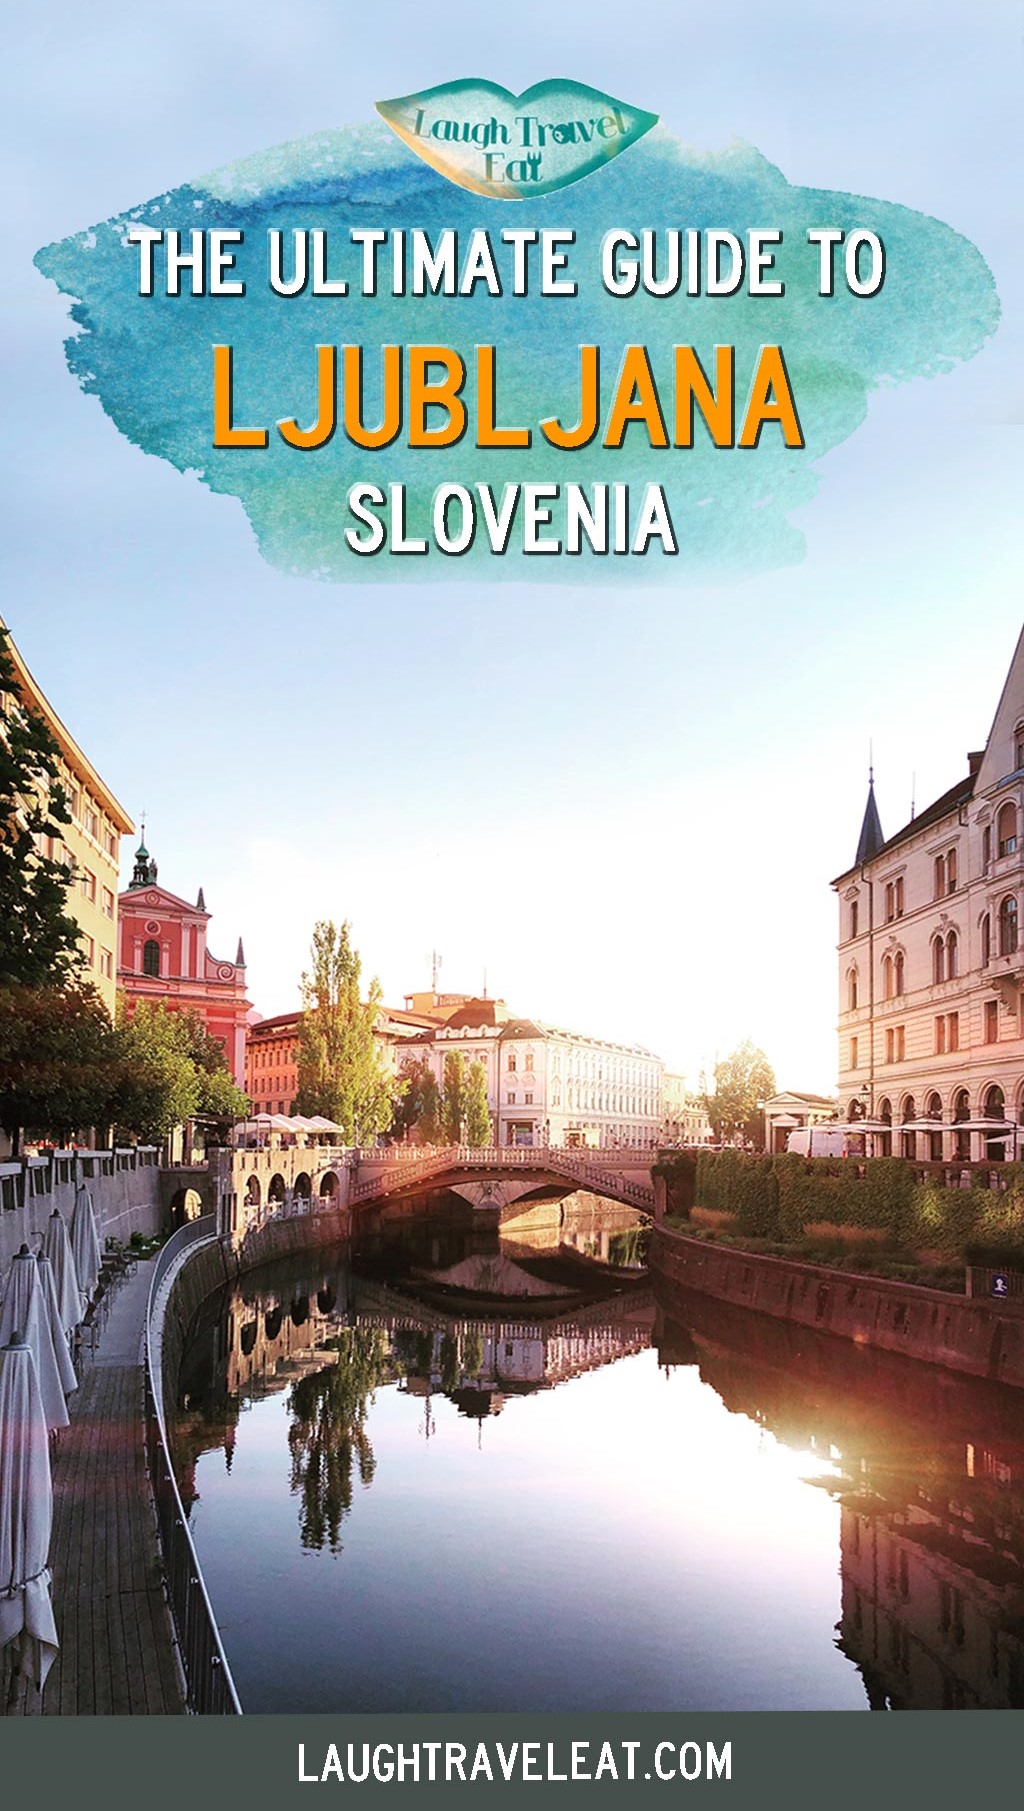 Ljubljana is one of the most understated capitals in Europe. A charming historical city that's worth exploring, here are the best places to see if you only have a day or two #lubljana #slovenia #cityguide